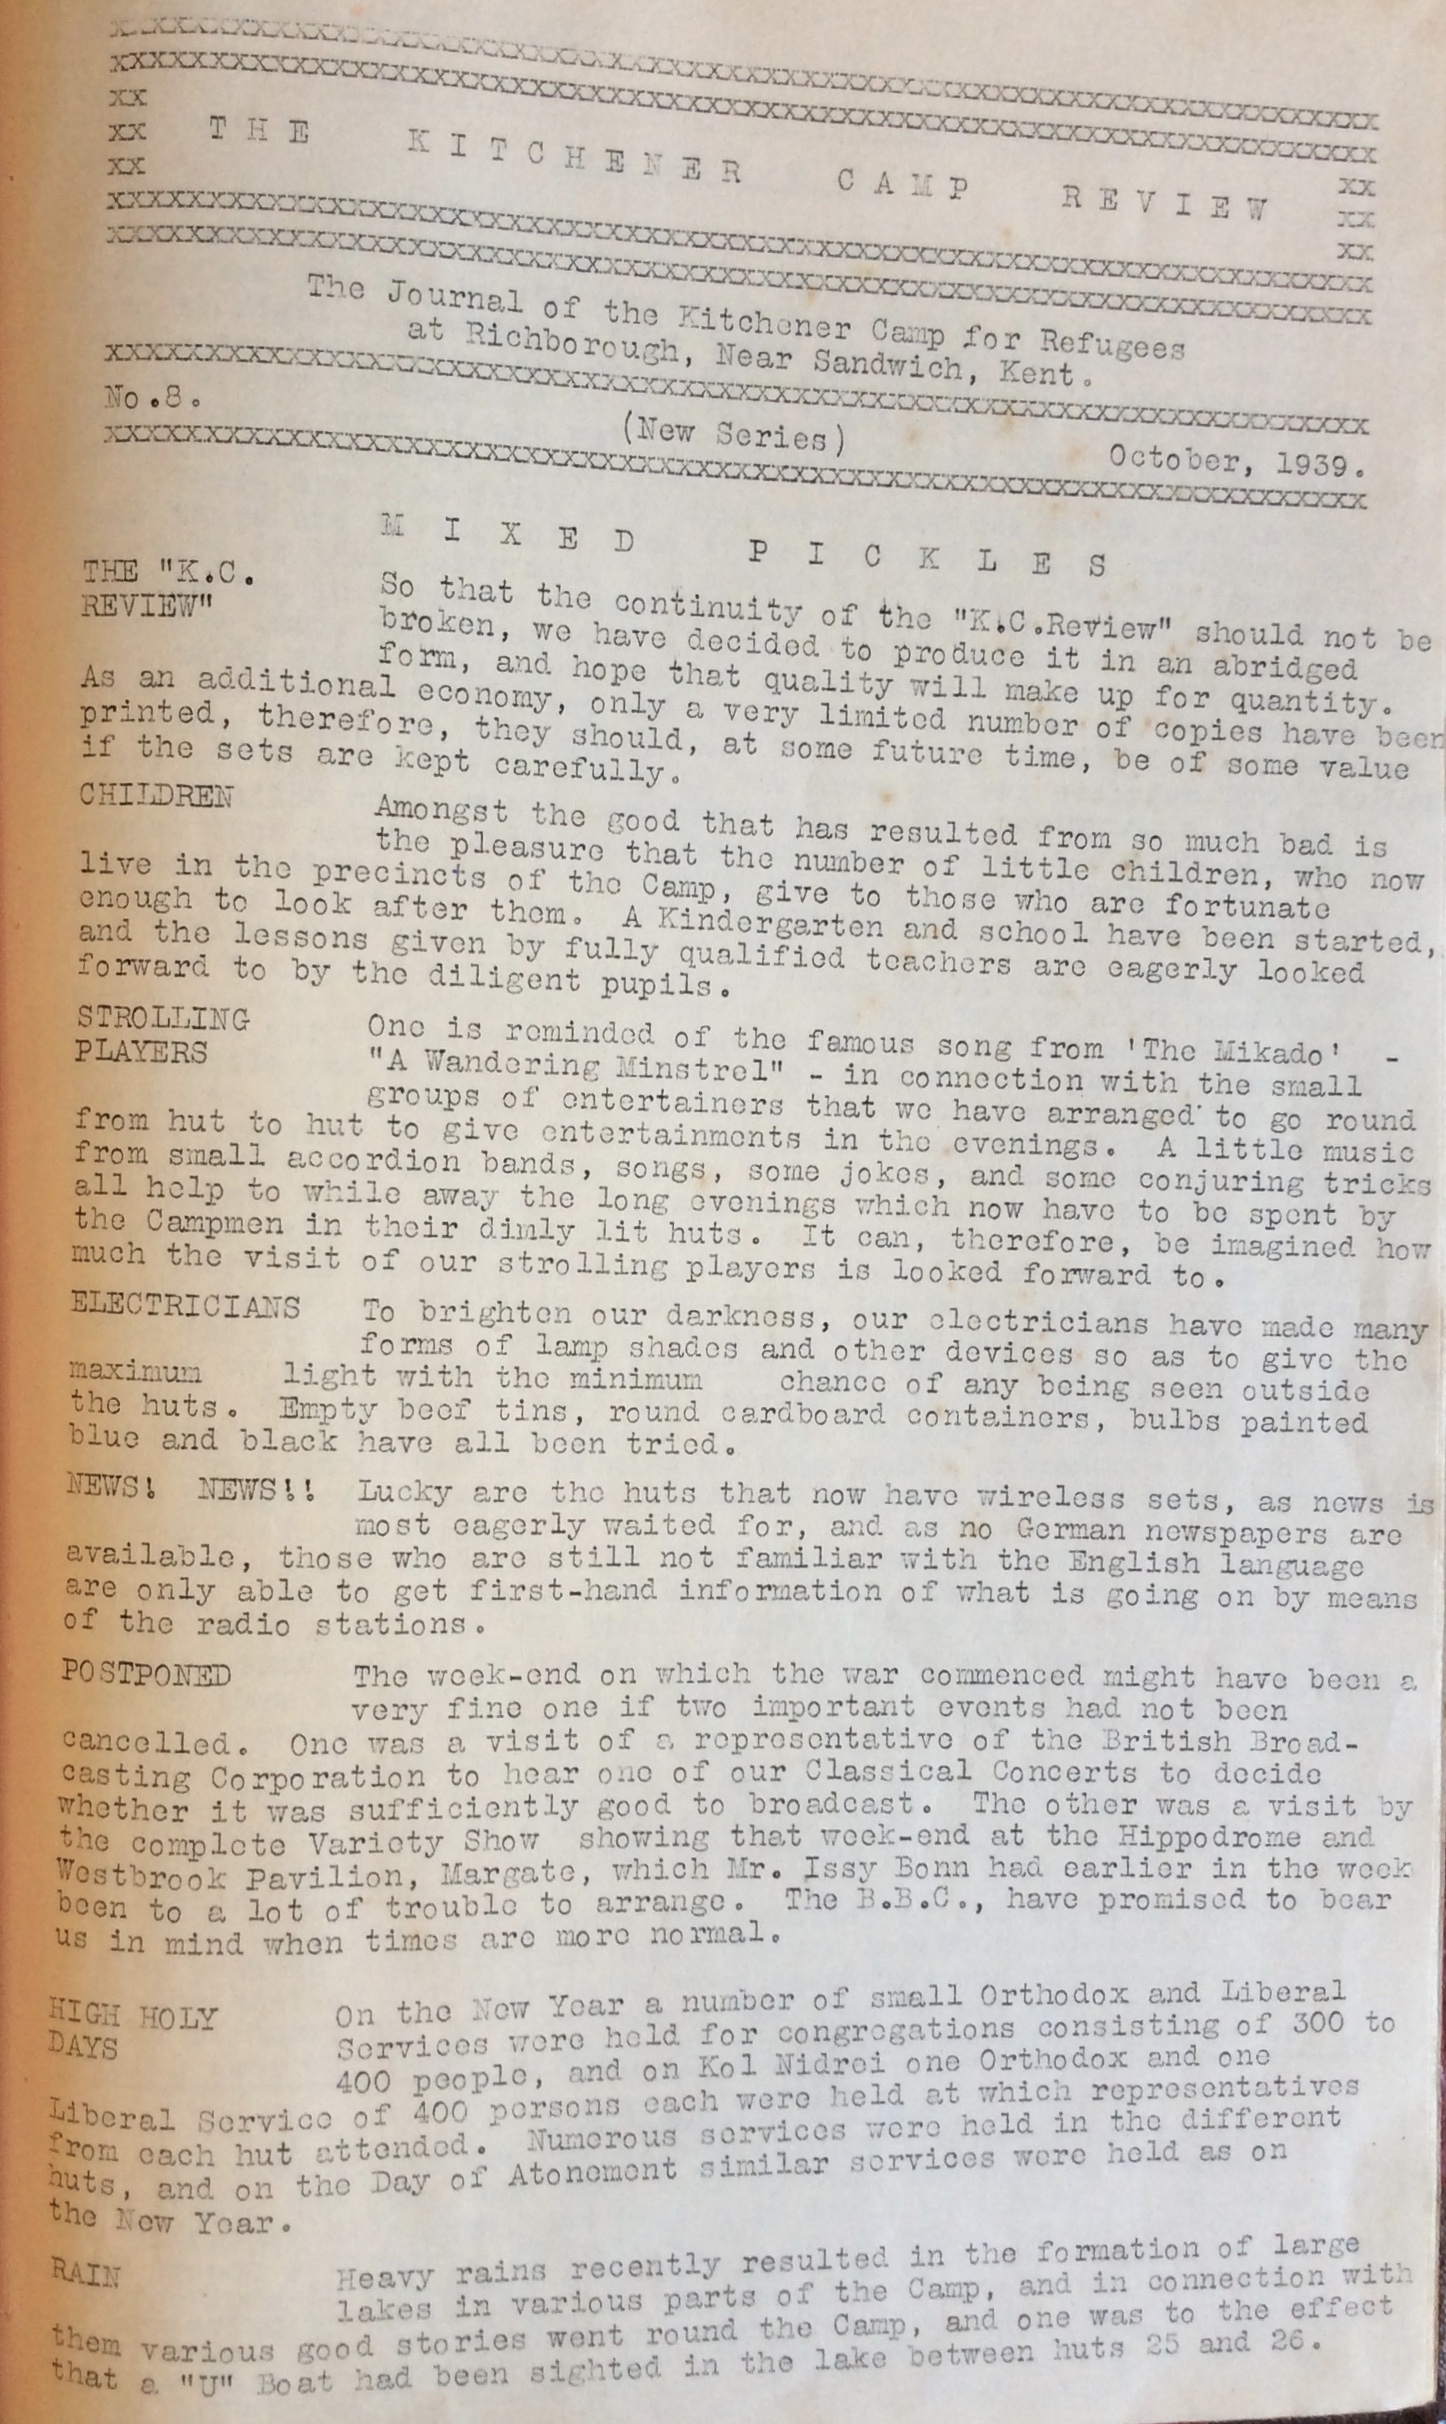 Kitchener Camp Review, October 1939, page 1